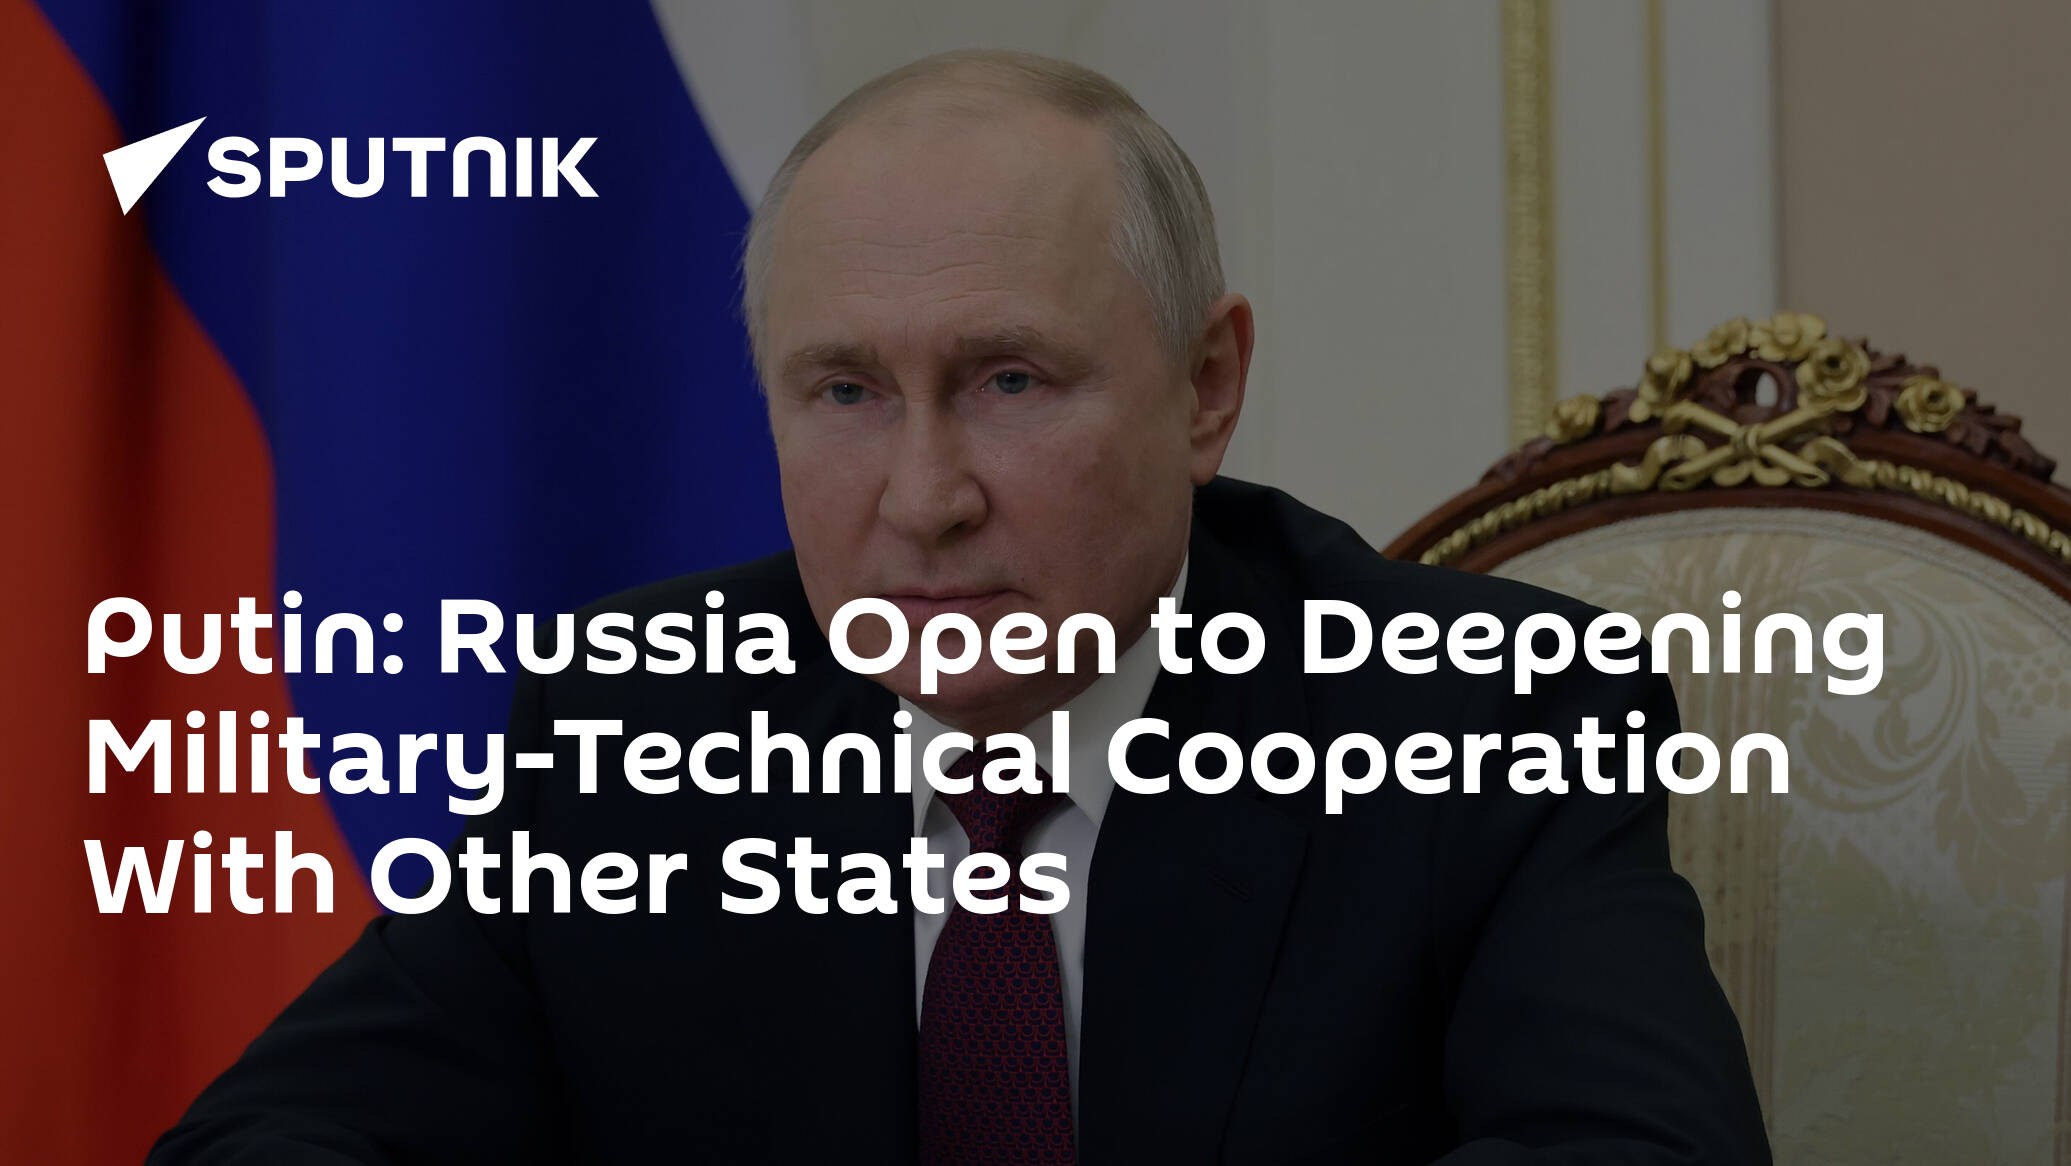 Putin: Russia Open to Deepening Military-Technical Cooperation With Other States